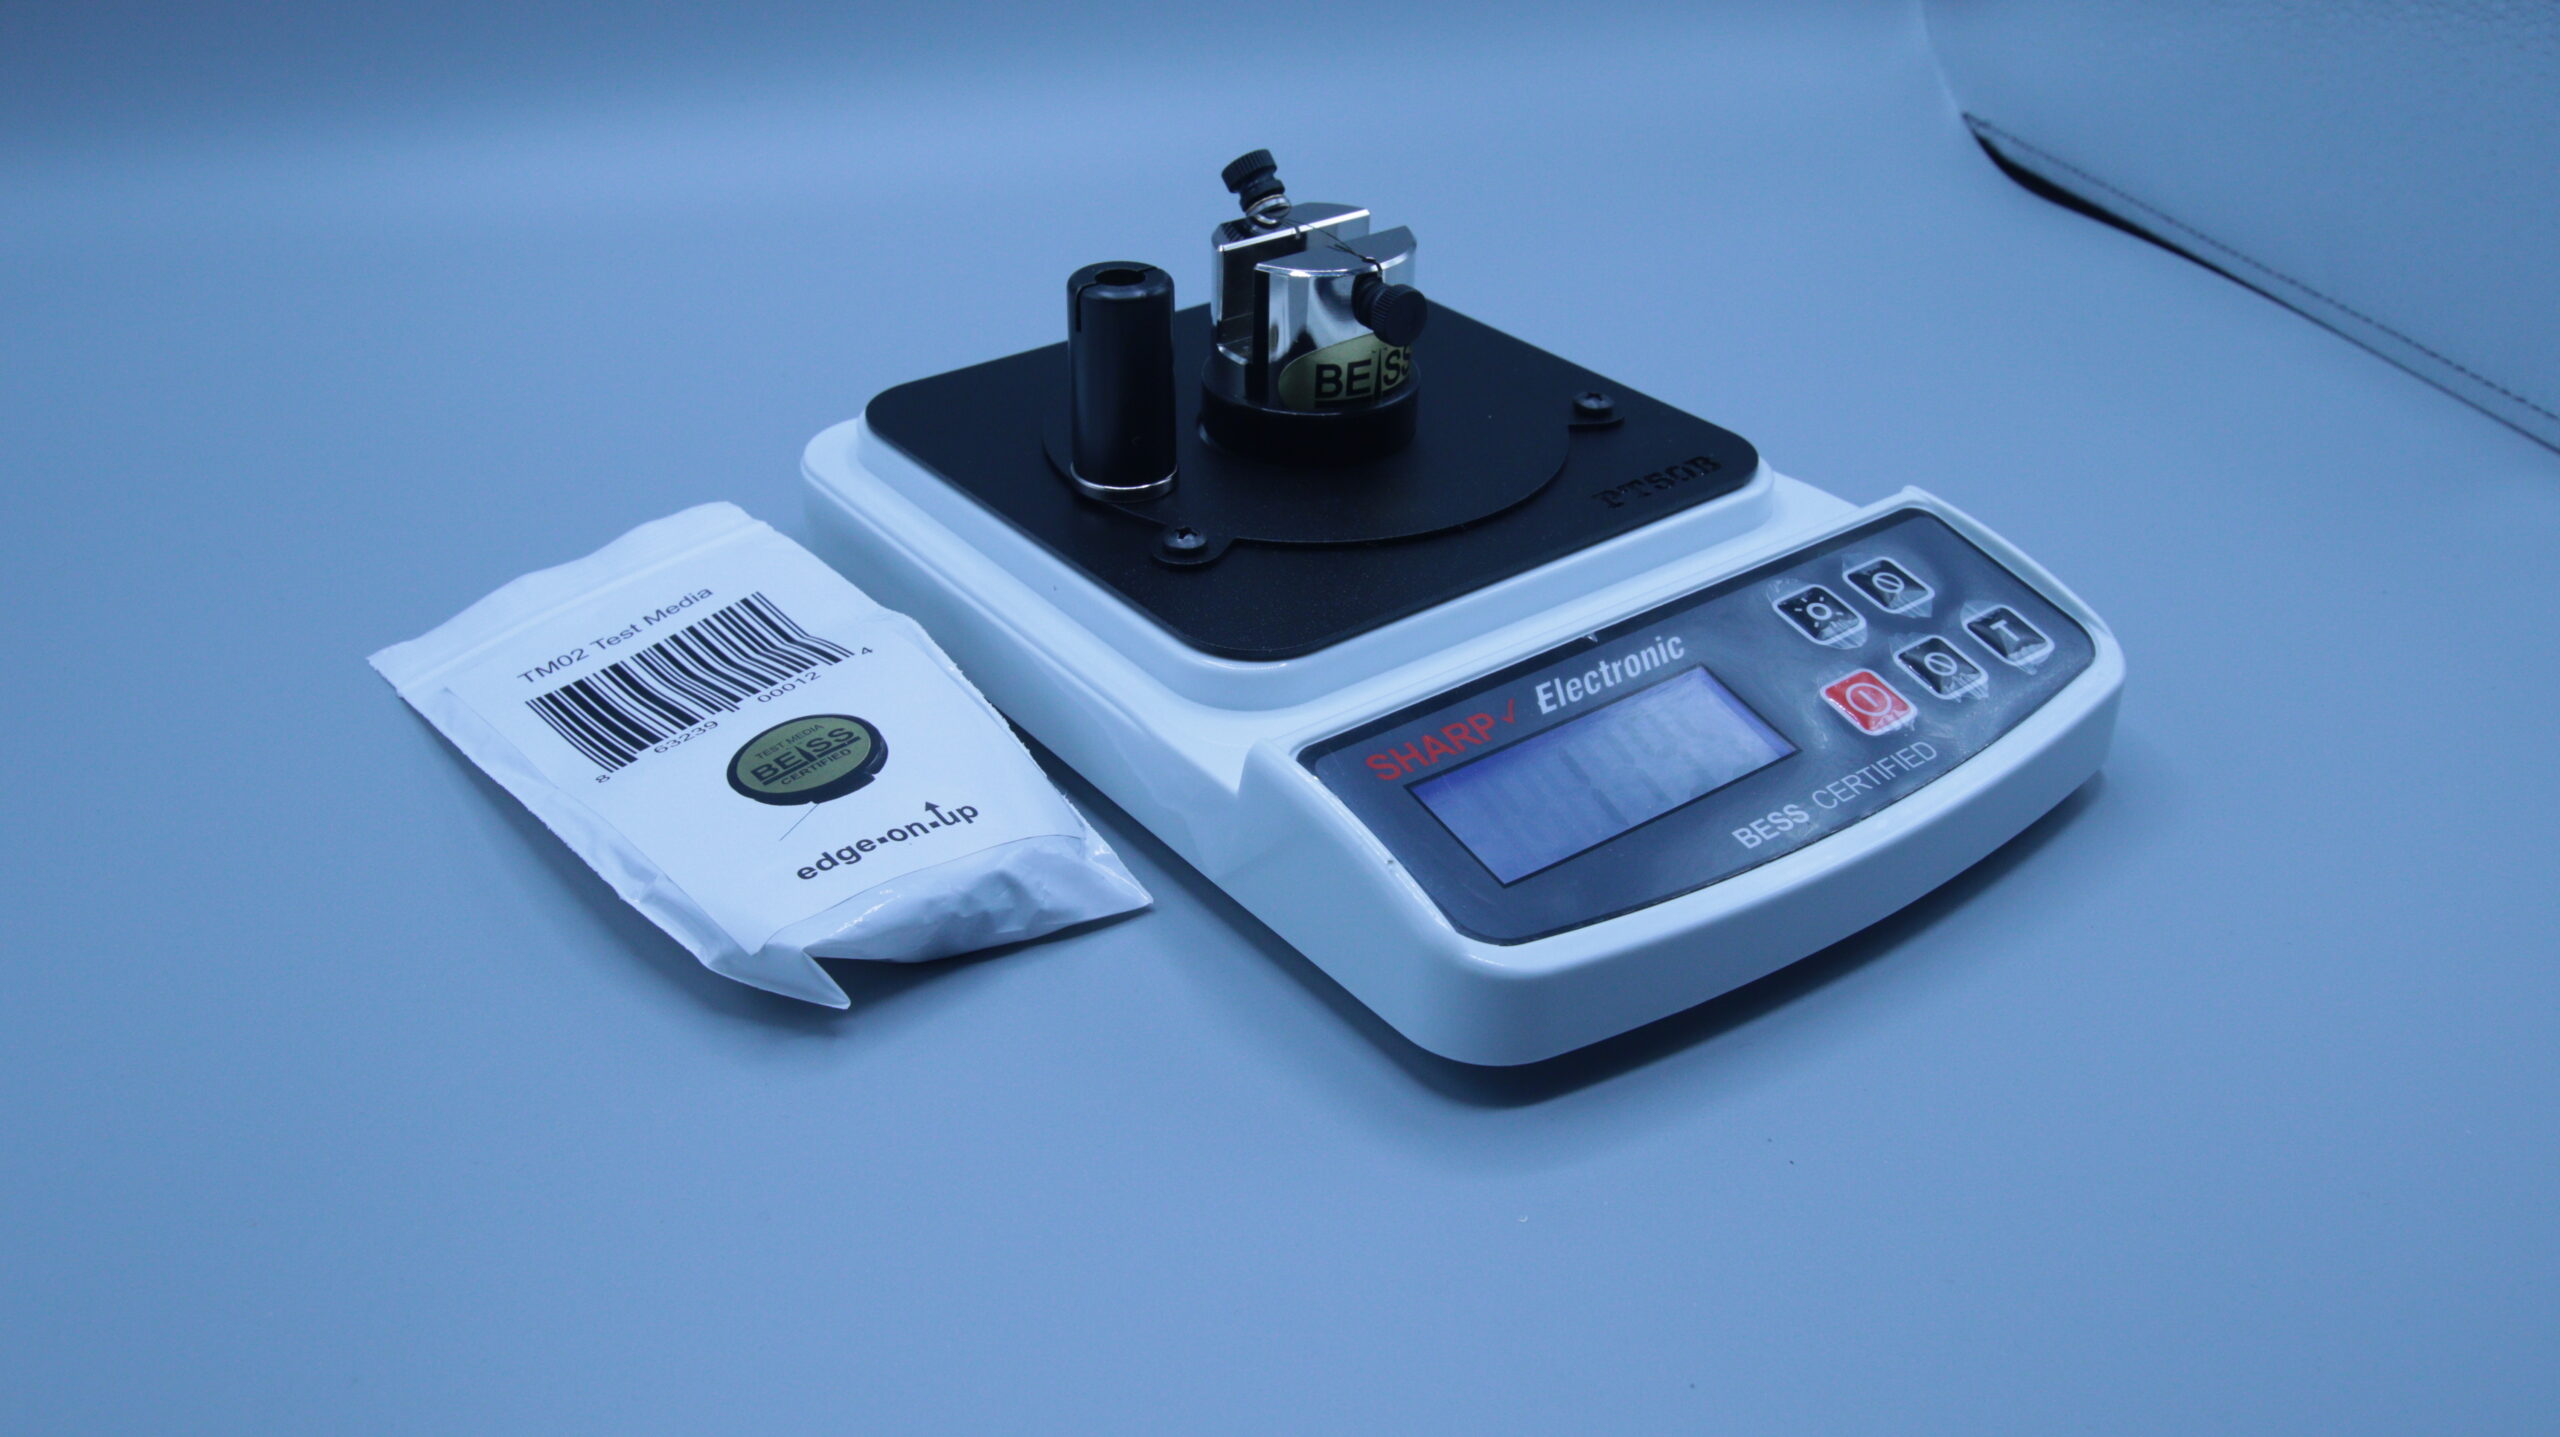 Edge-On-Up PT50C sharpness tester  Advantageously shopping at